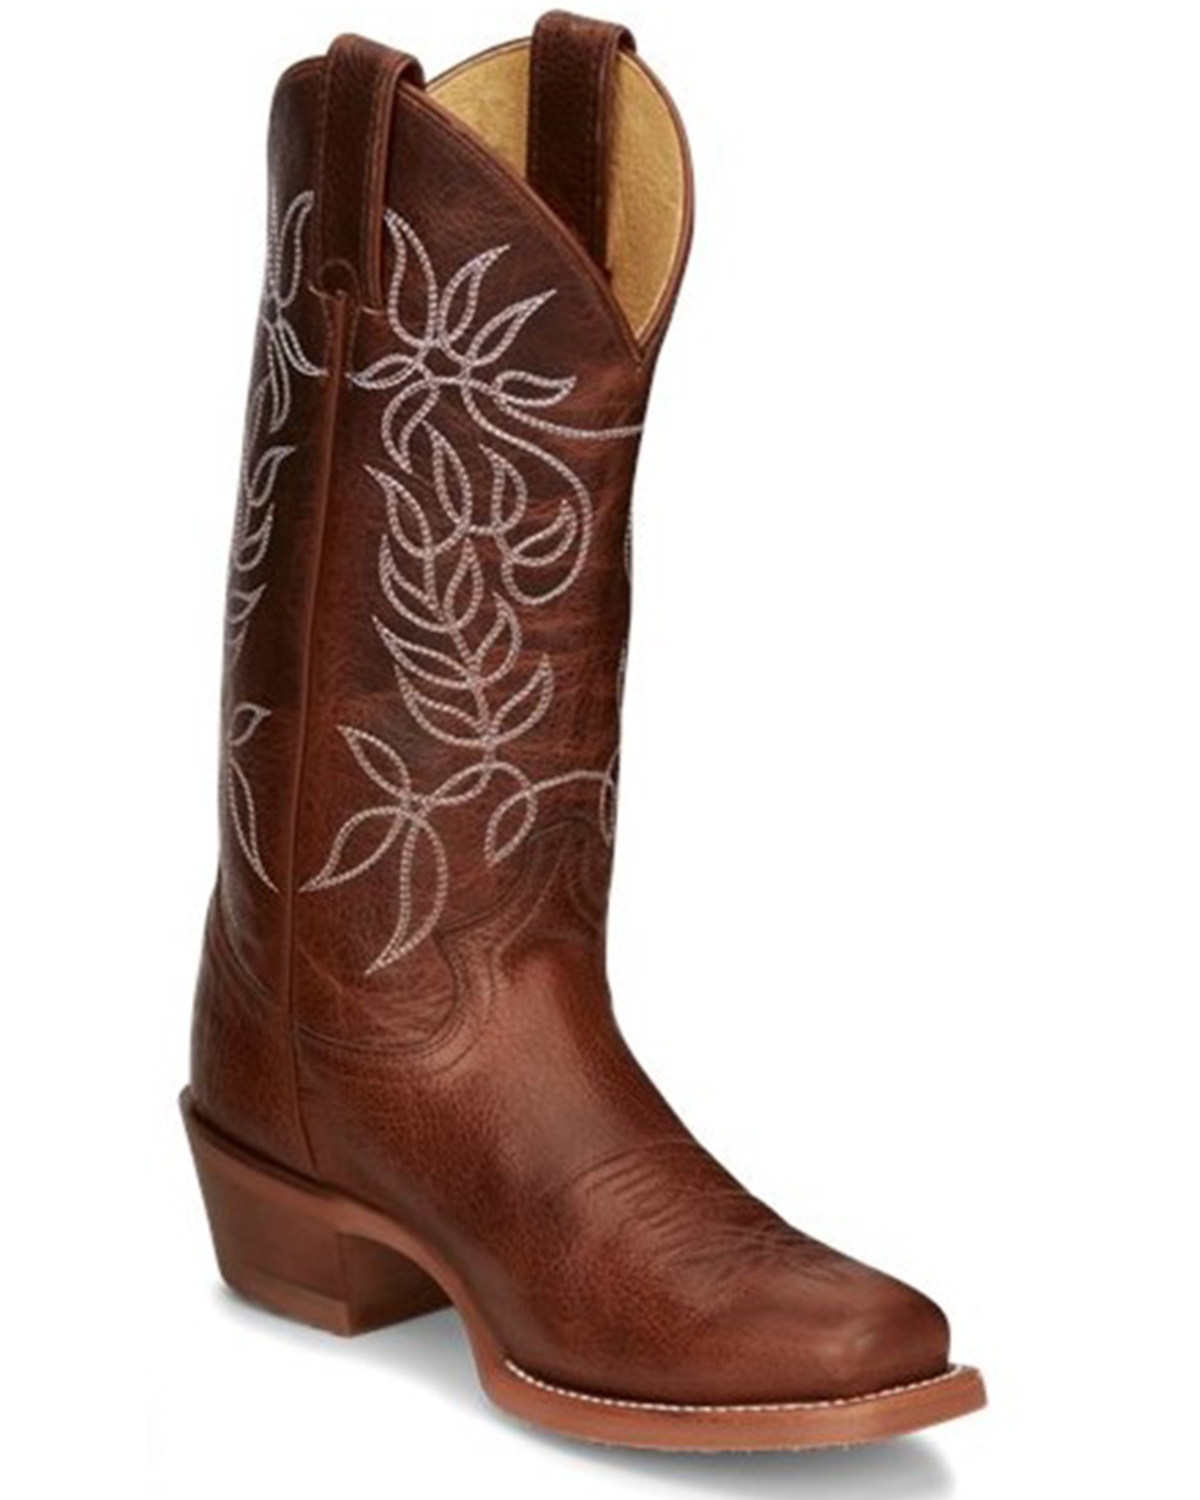 Justin Women's Vickory Performance Leather Western Boots - Square Toe